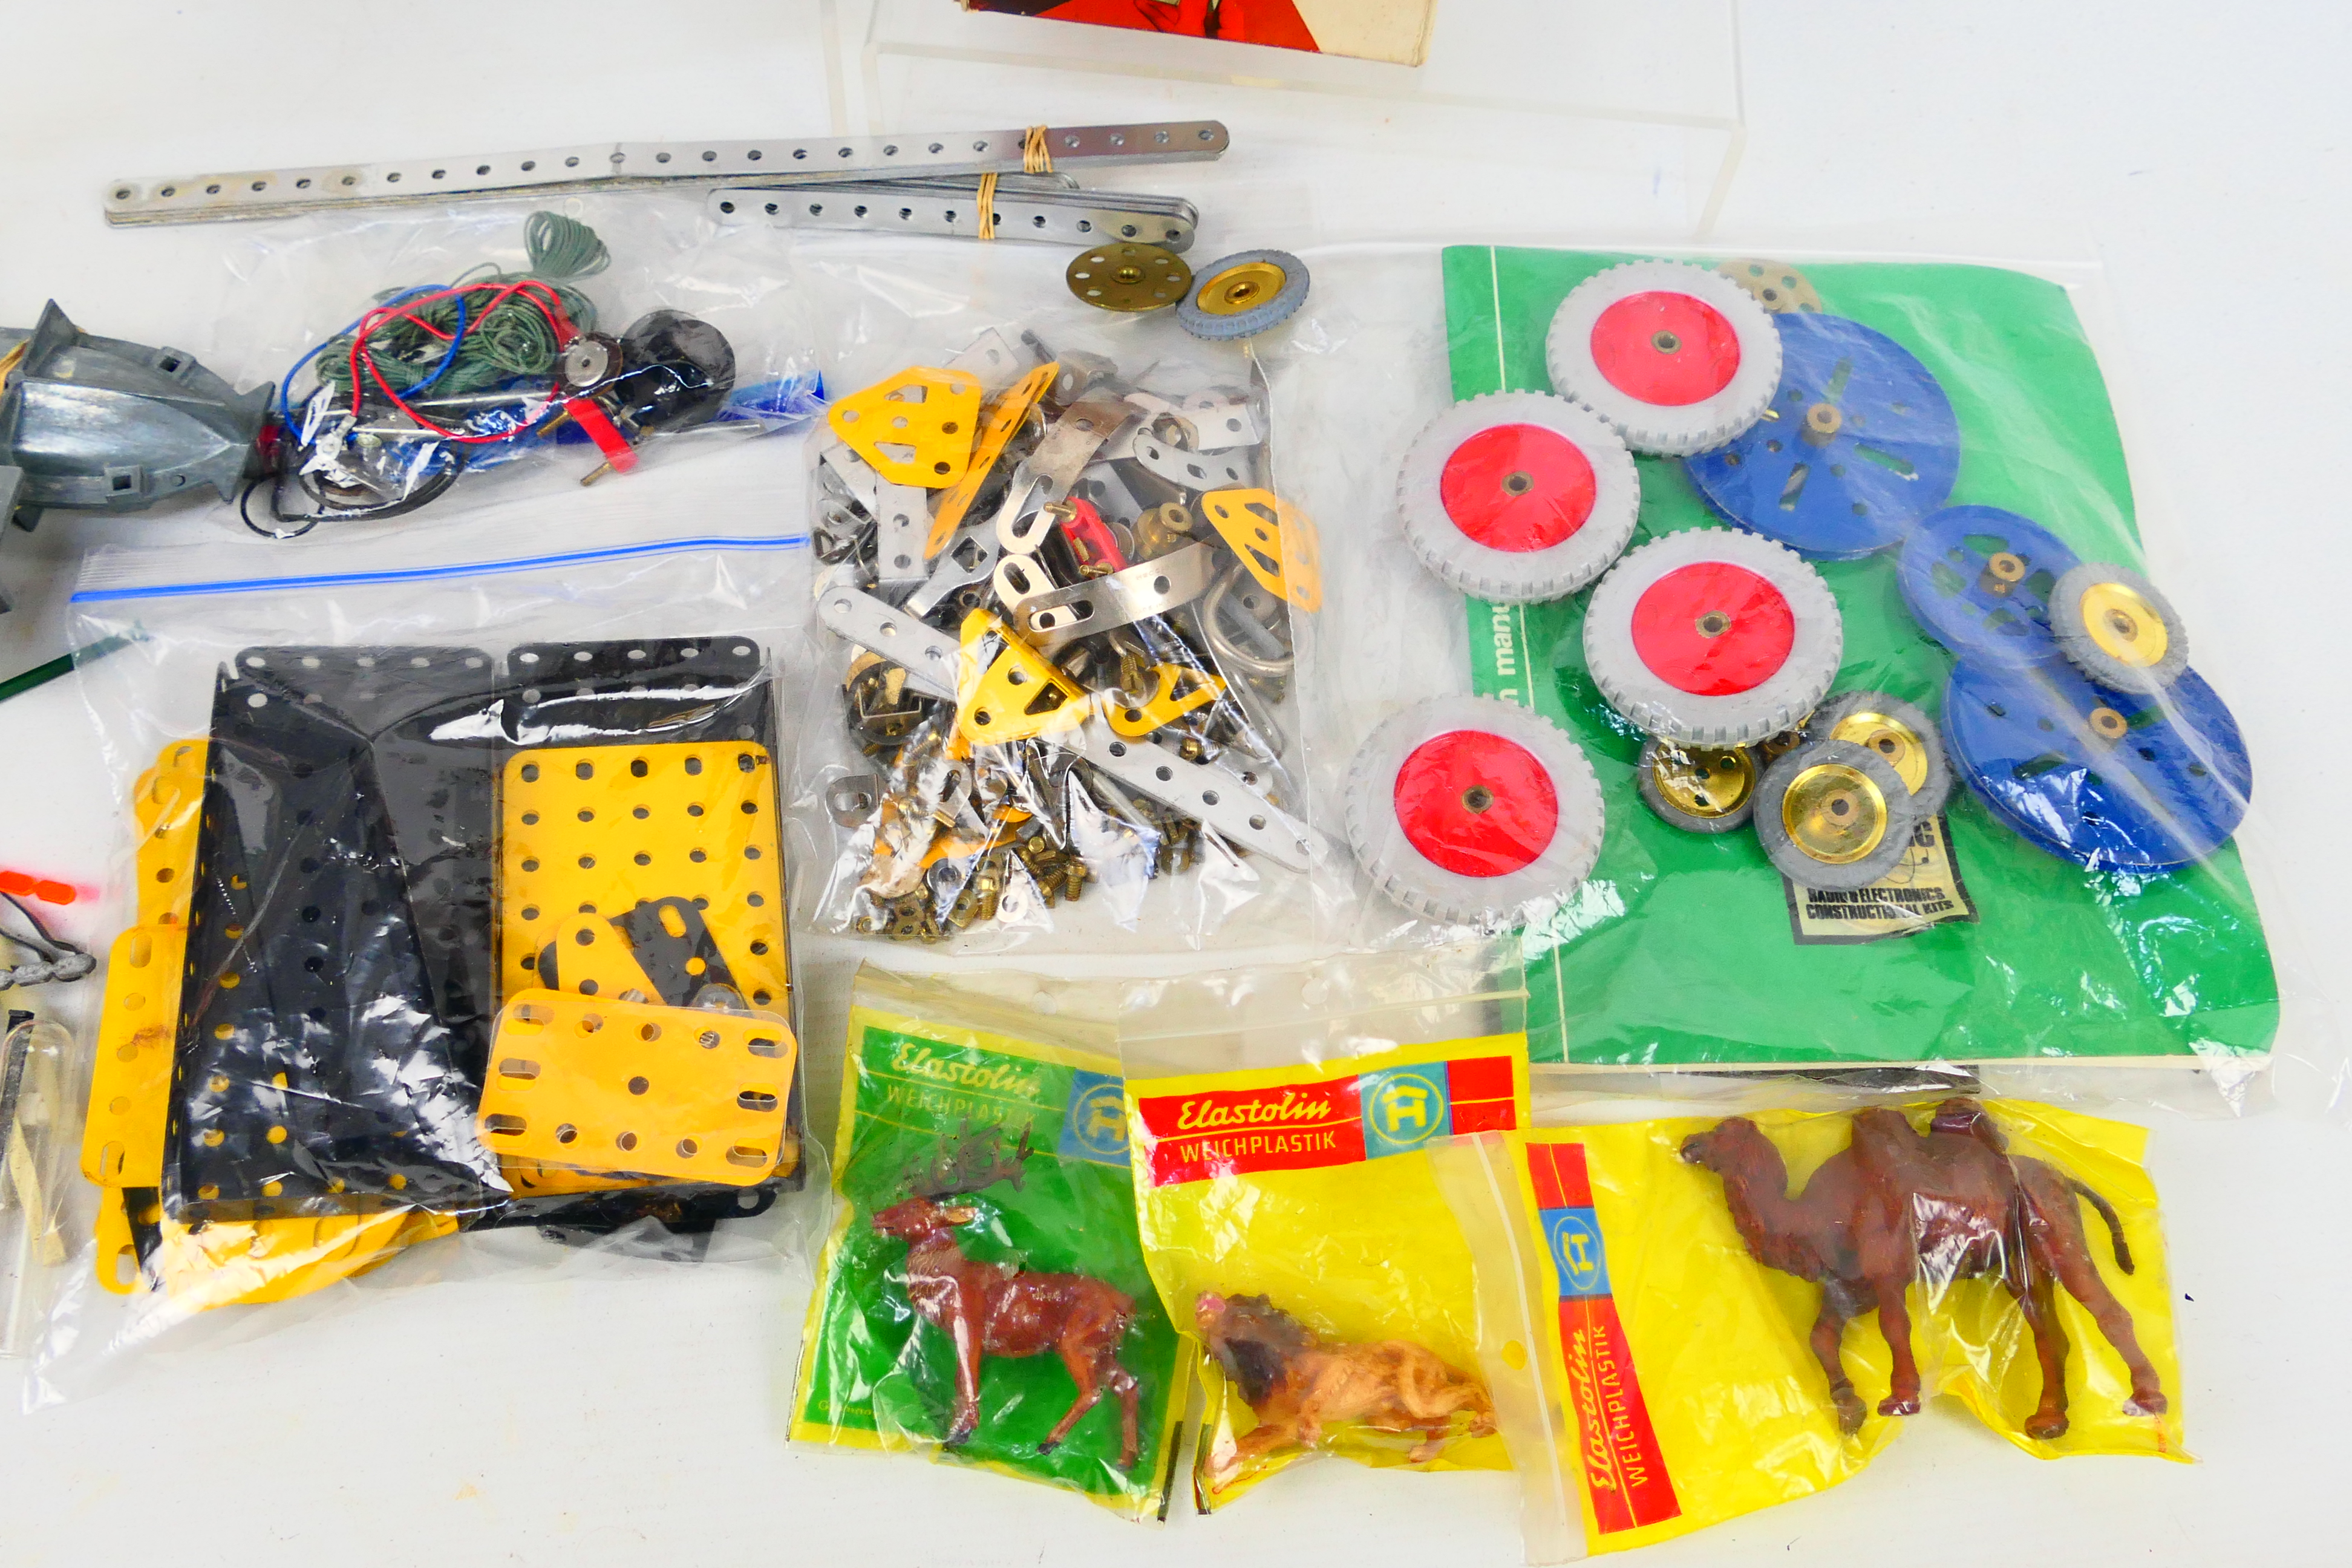 Mamod - Meccano - Elastolin - Sawyers - A collection of vintage items including Meccano parts, - Image 4 of 4